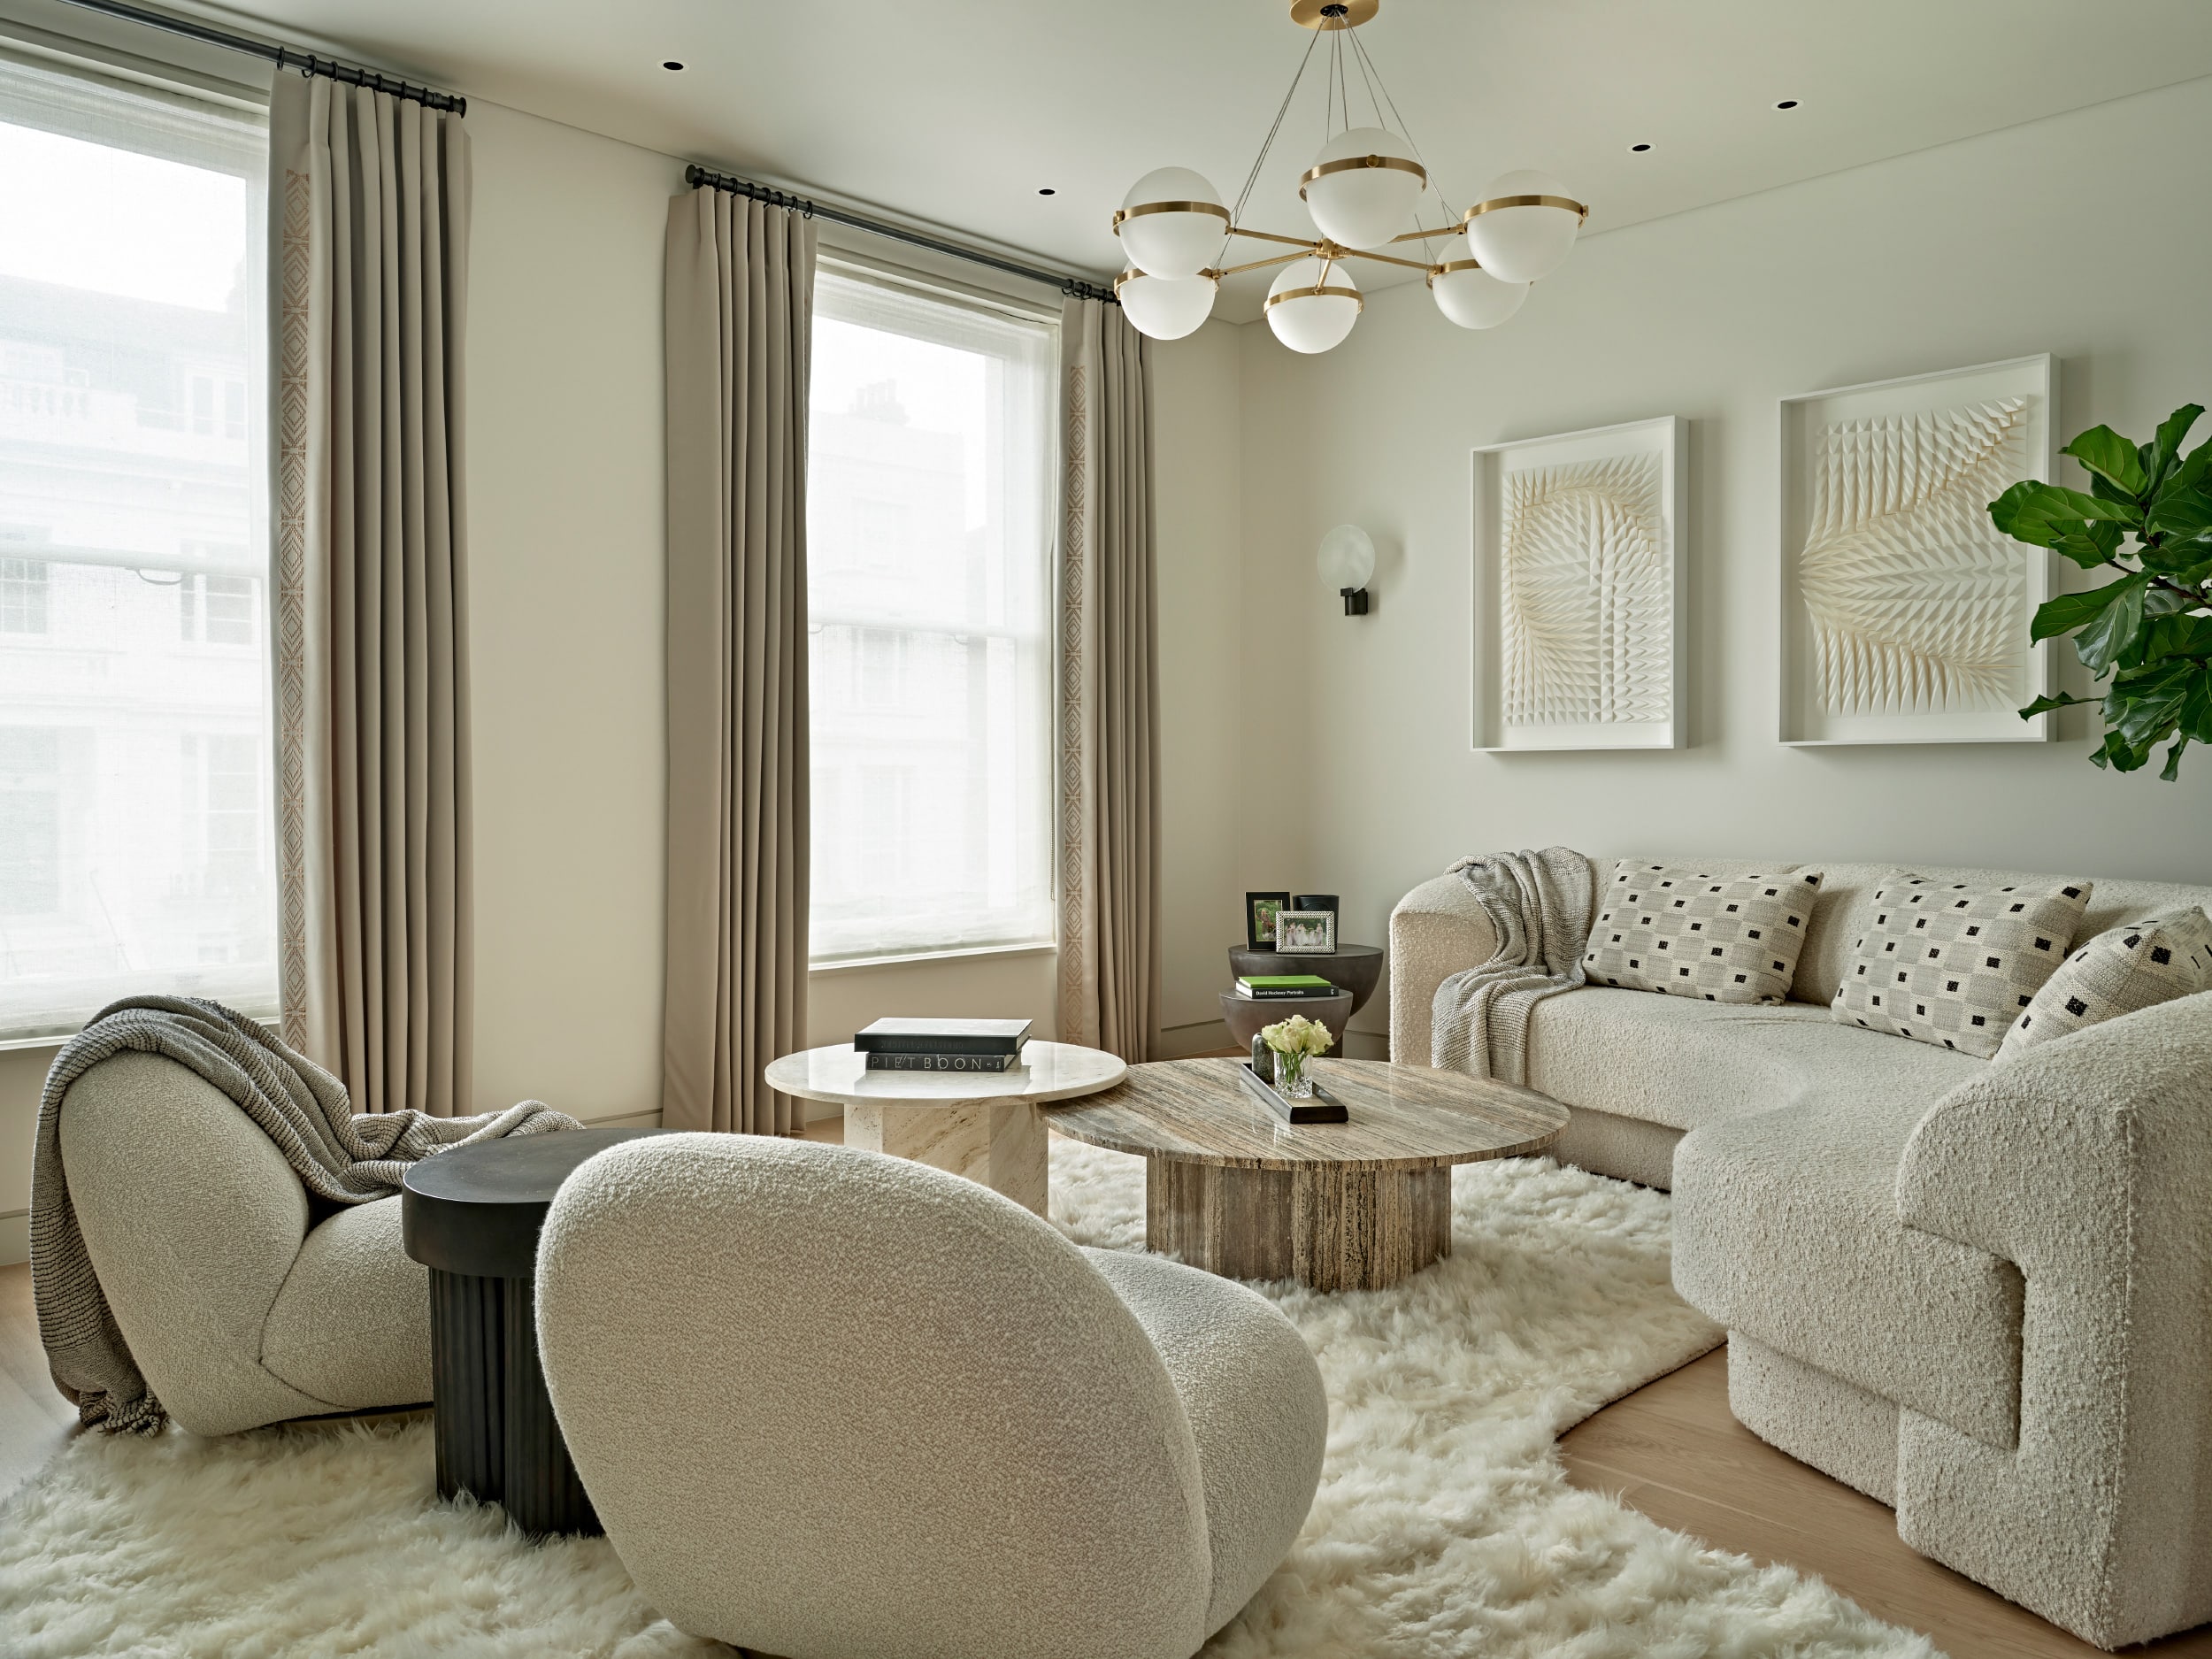 A luxury residential living room in Ireland, where elegance meets comfort. Positioned on a curved white fluffy rug are two white, textured high-end armchairs, inviting you to relax in style. A corner sofa, matching the fabric of the armchairs, features curved edges for a touch of sophistication. Three simple patterned cushions adorn the sofa, adding a pop of color and coziness. A matching blanket drapes gracefully on the corner of the sofa. Two white textured art pieces hang on the white wall, adding visual interest and depth. A tall green plant in the corner brings a touch of nature indoors. Two marble coffee tables in different natural tones proudly display books on top. The light wood floor adds warmth and elegance to the room. Two windows, adorned with natural curtains, invite in abundant natural light, completing this luxurious living room.